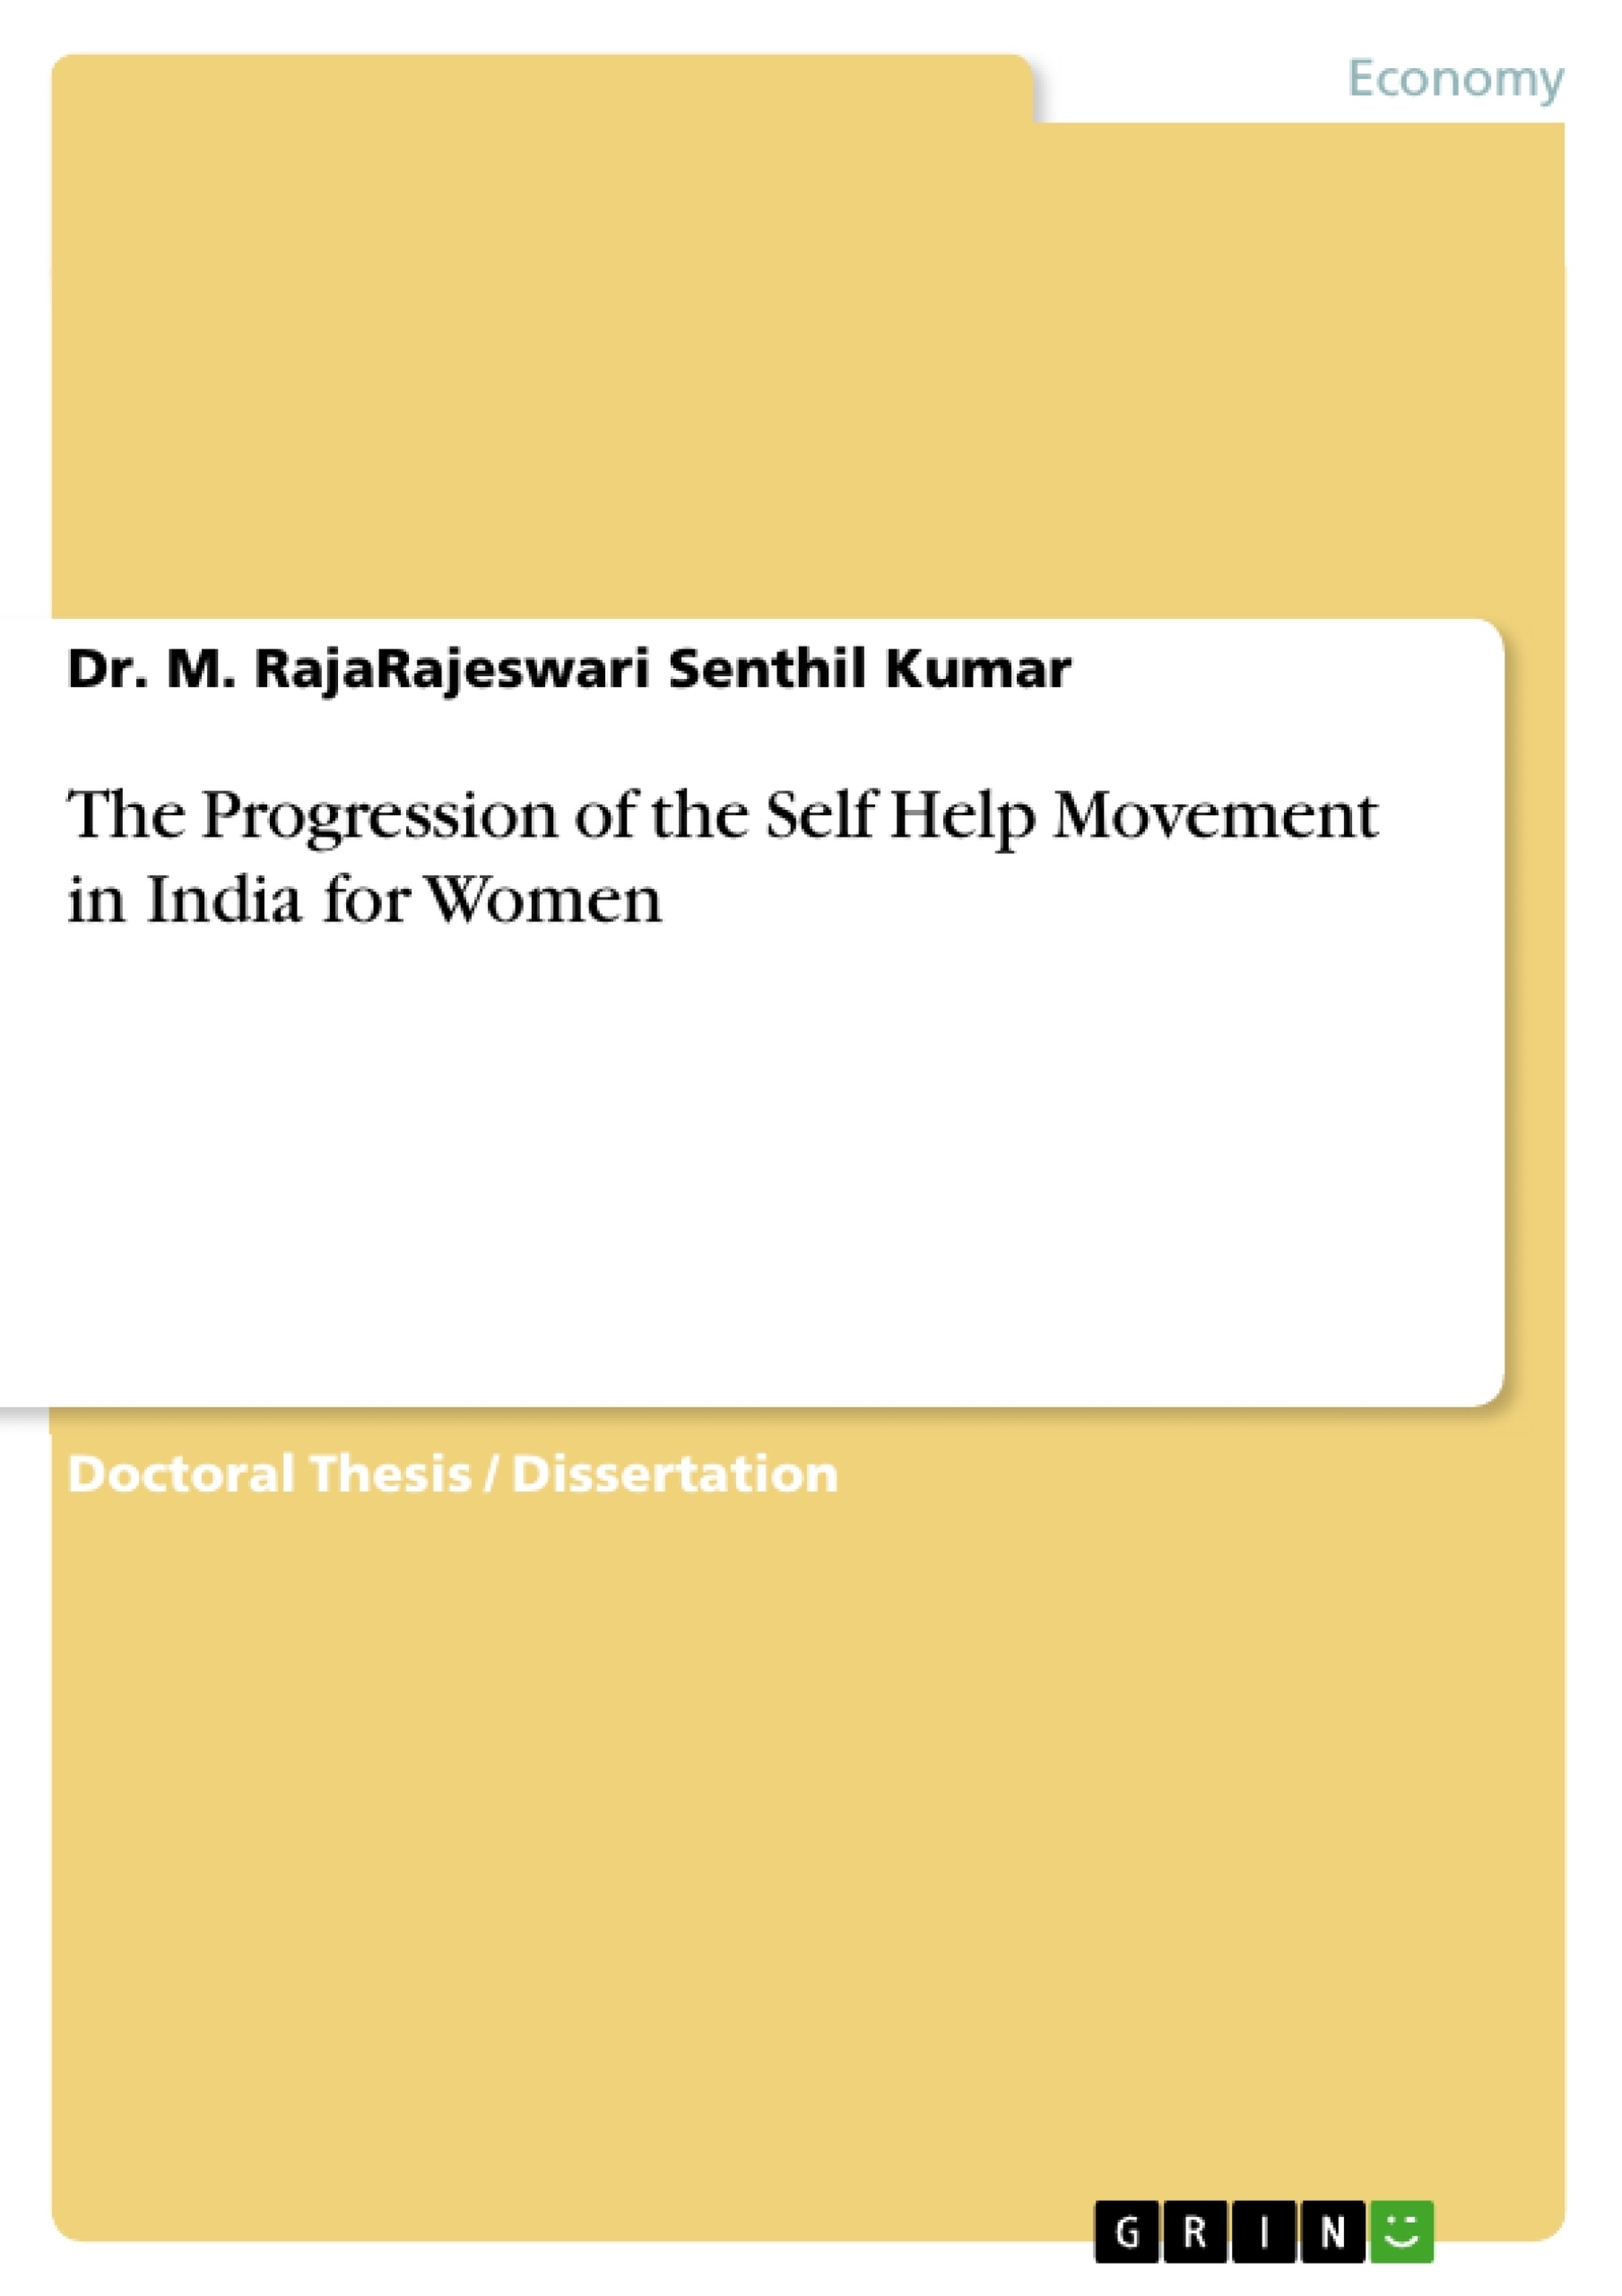 Título: The Progression of the Self Help Movement in India for Women